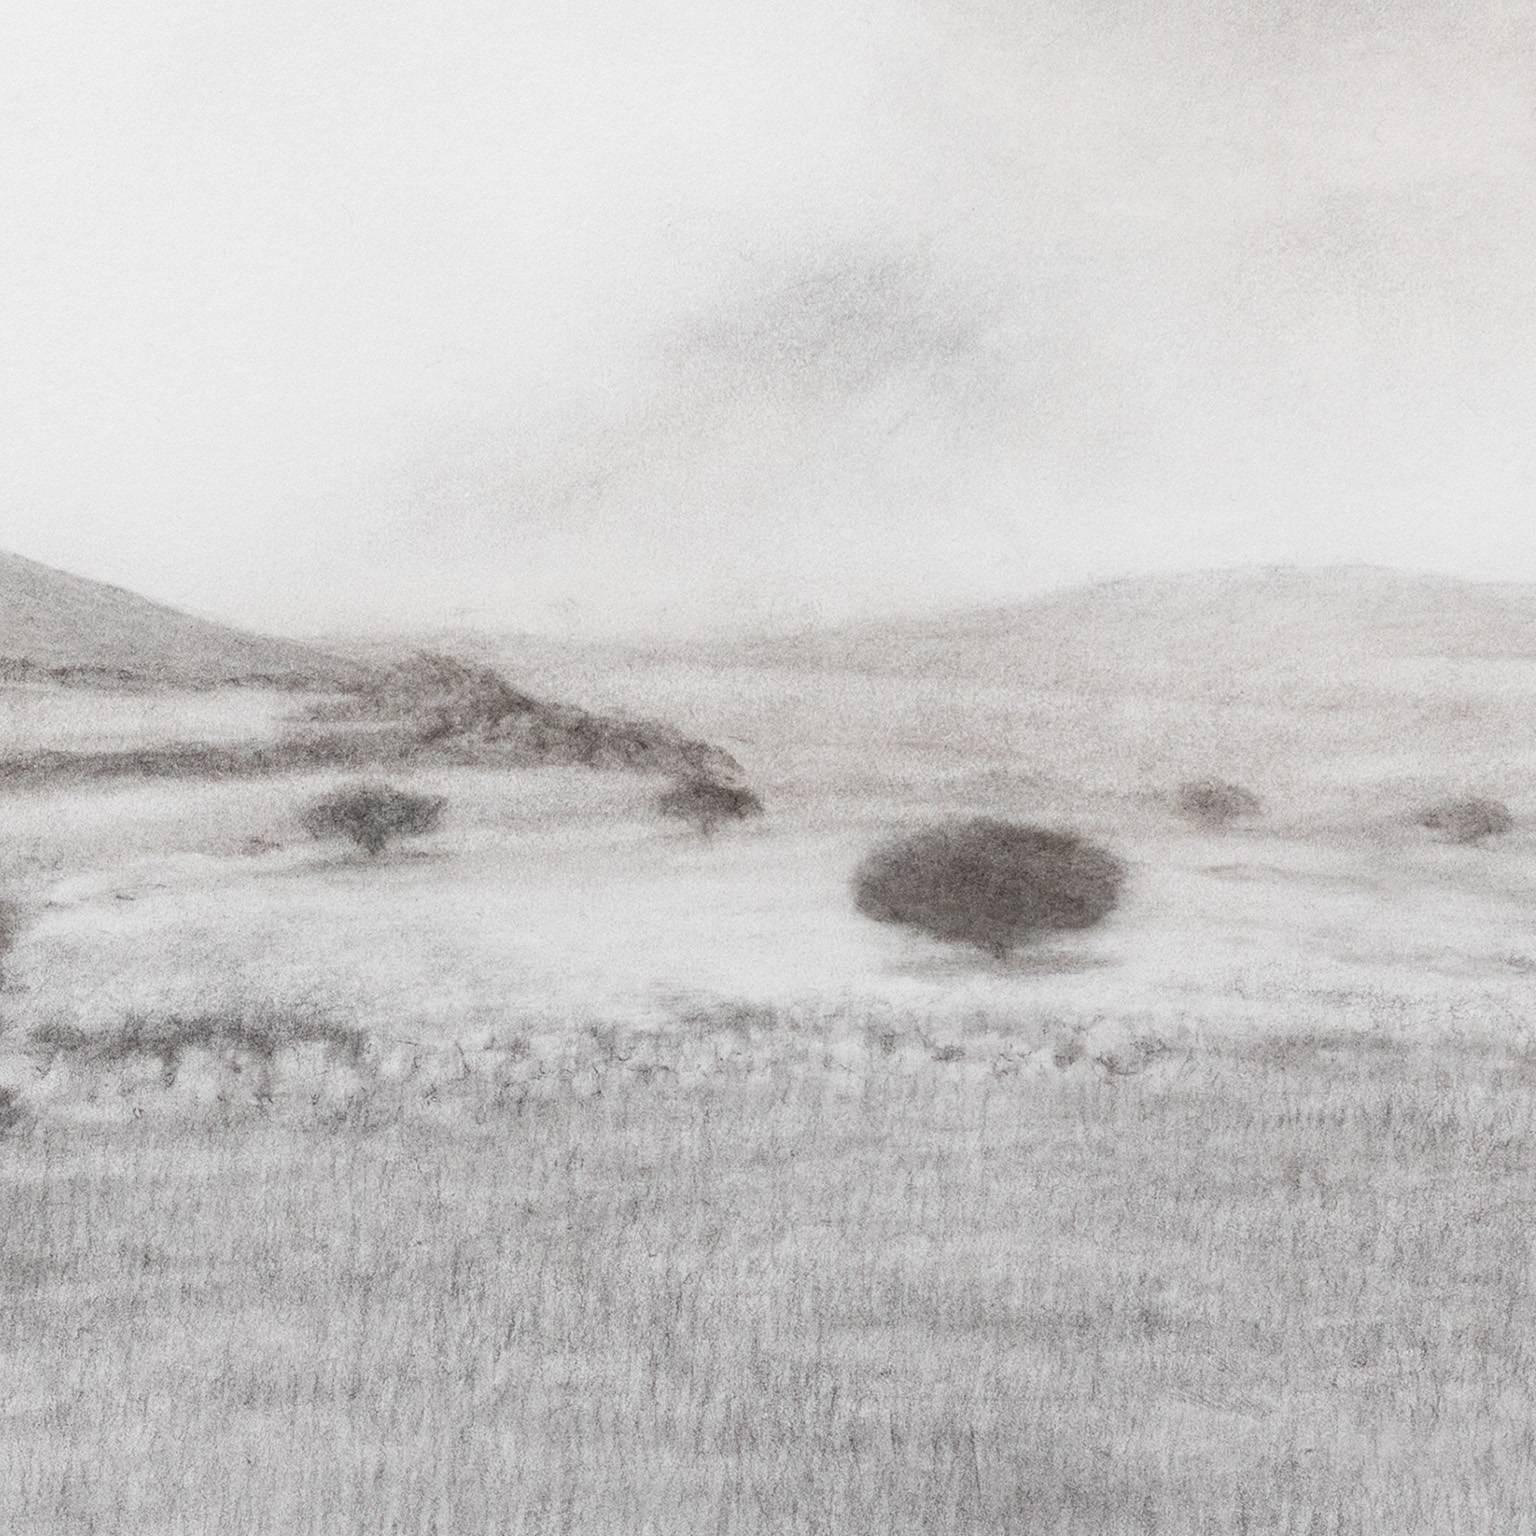 Olive Grove with Hills in the Distance - Charcoal Drawing, Greek Island, Country - Realist Art by George Tzannes